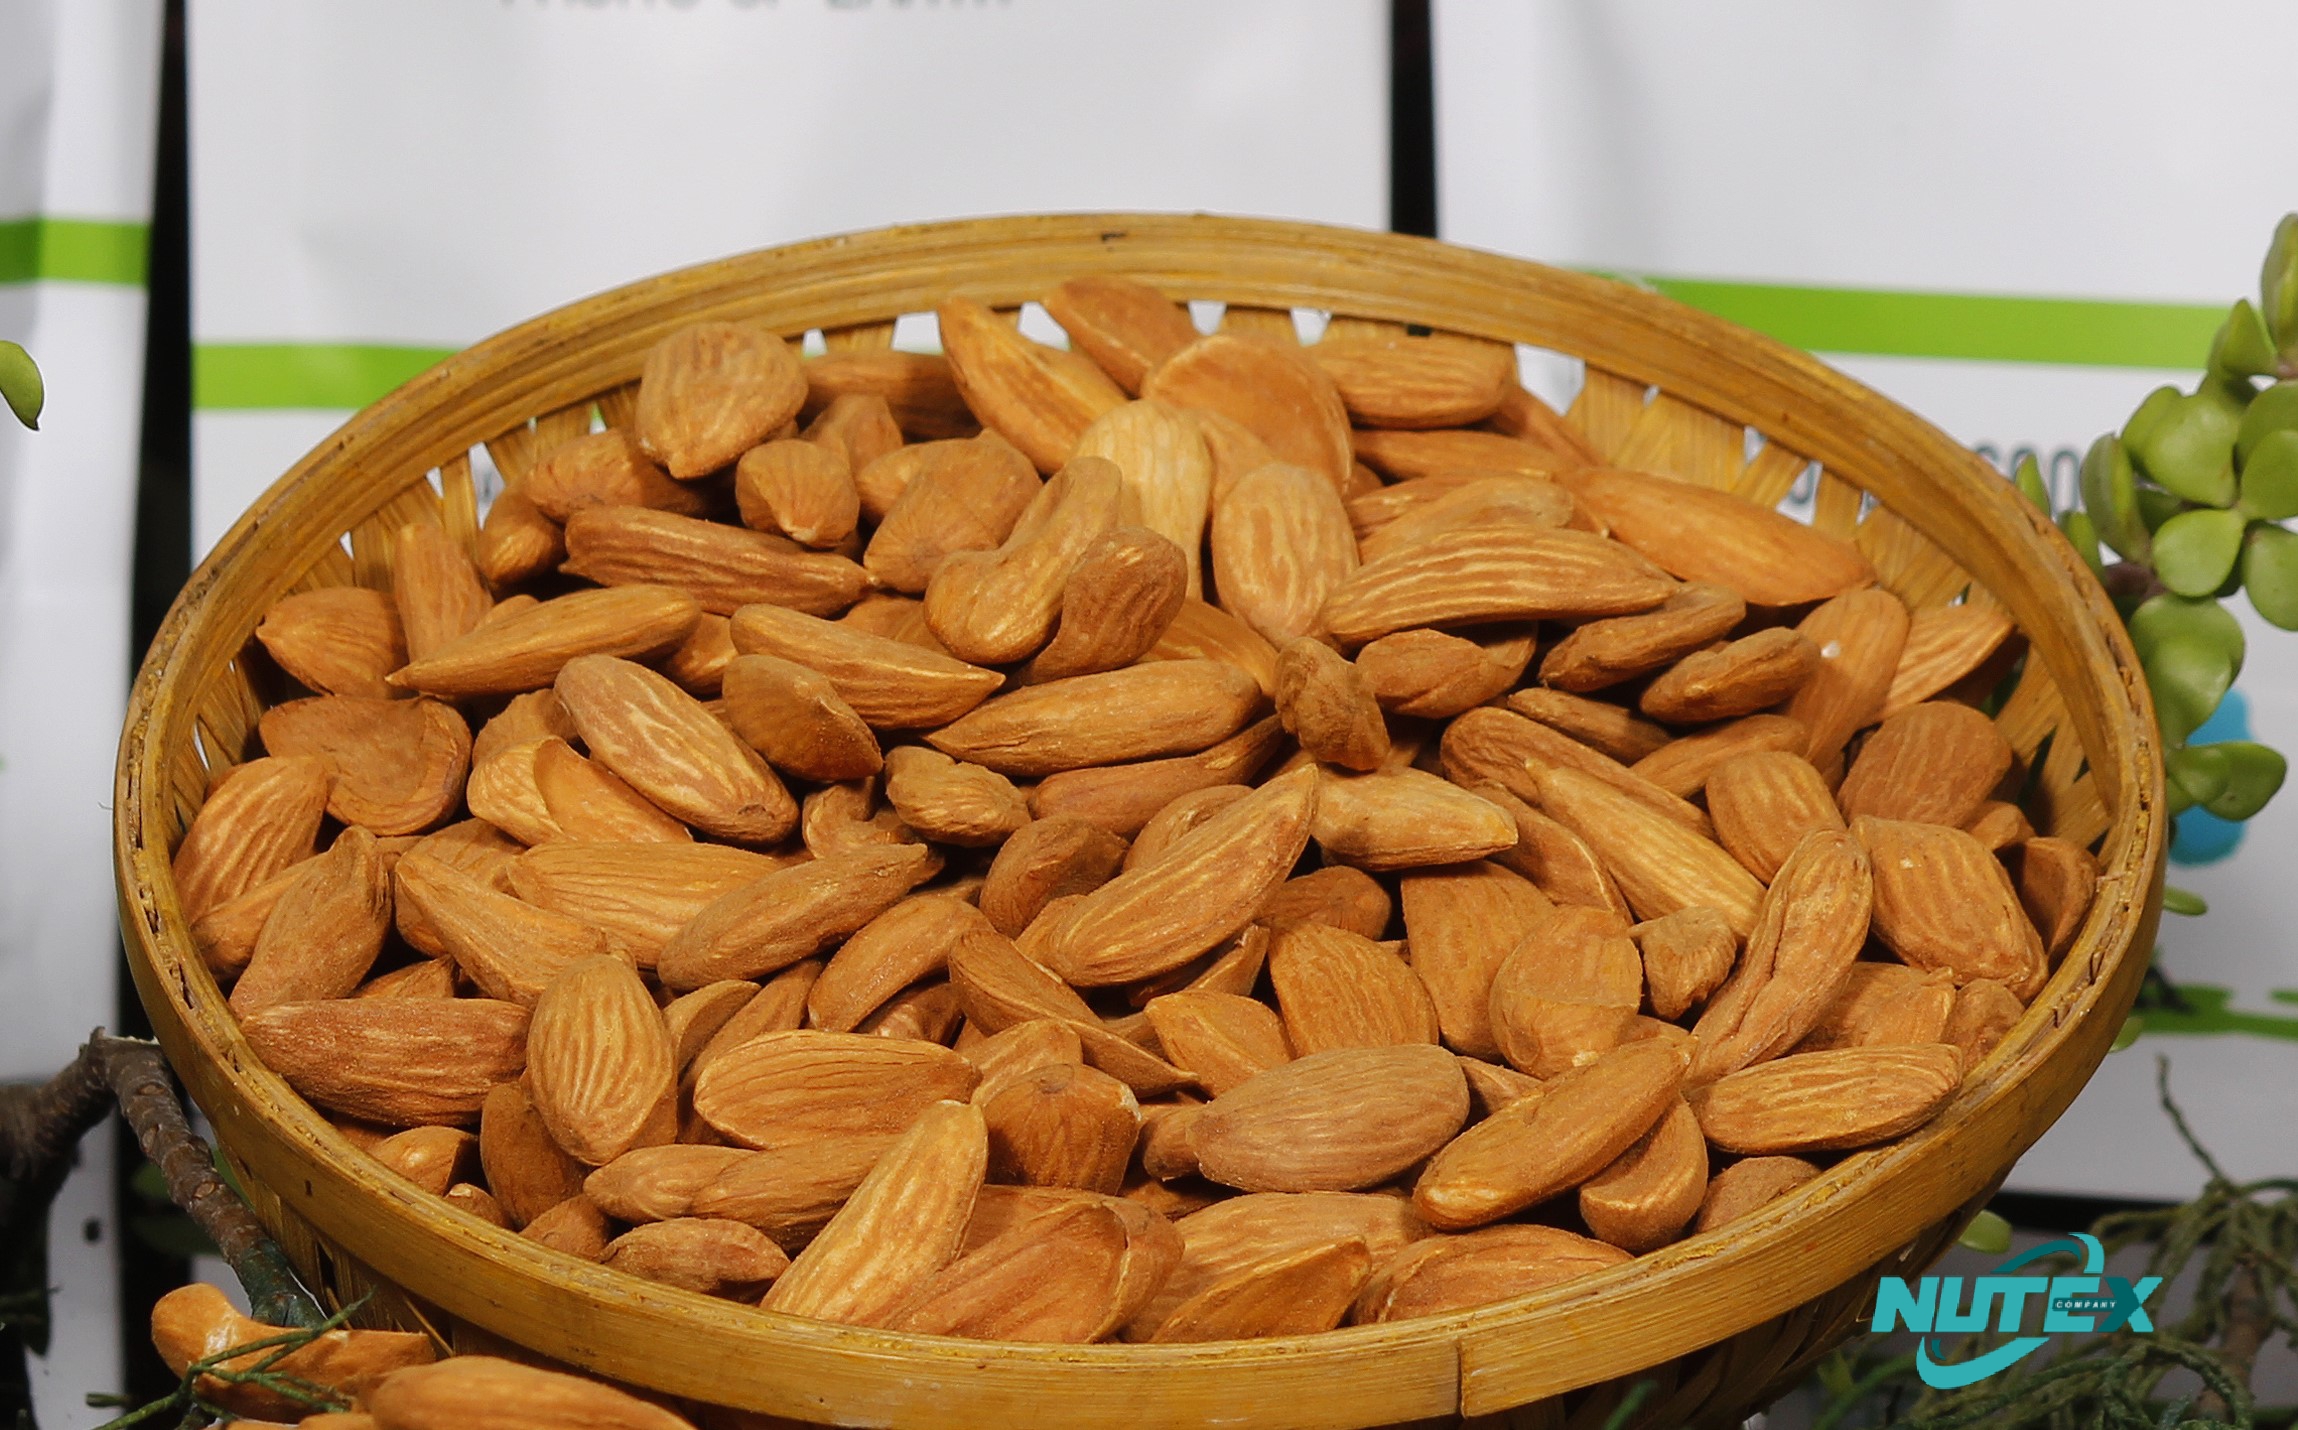 Production and export of quality Mamra almonds_Inquiry the Wholesale Price of Iranian Mamra Almonds_ Nutex Dried Fruit Company